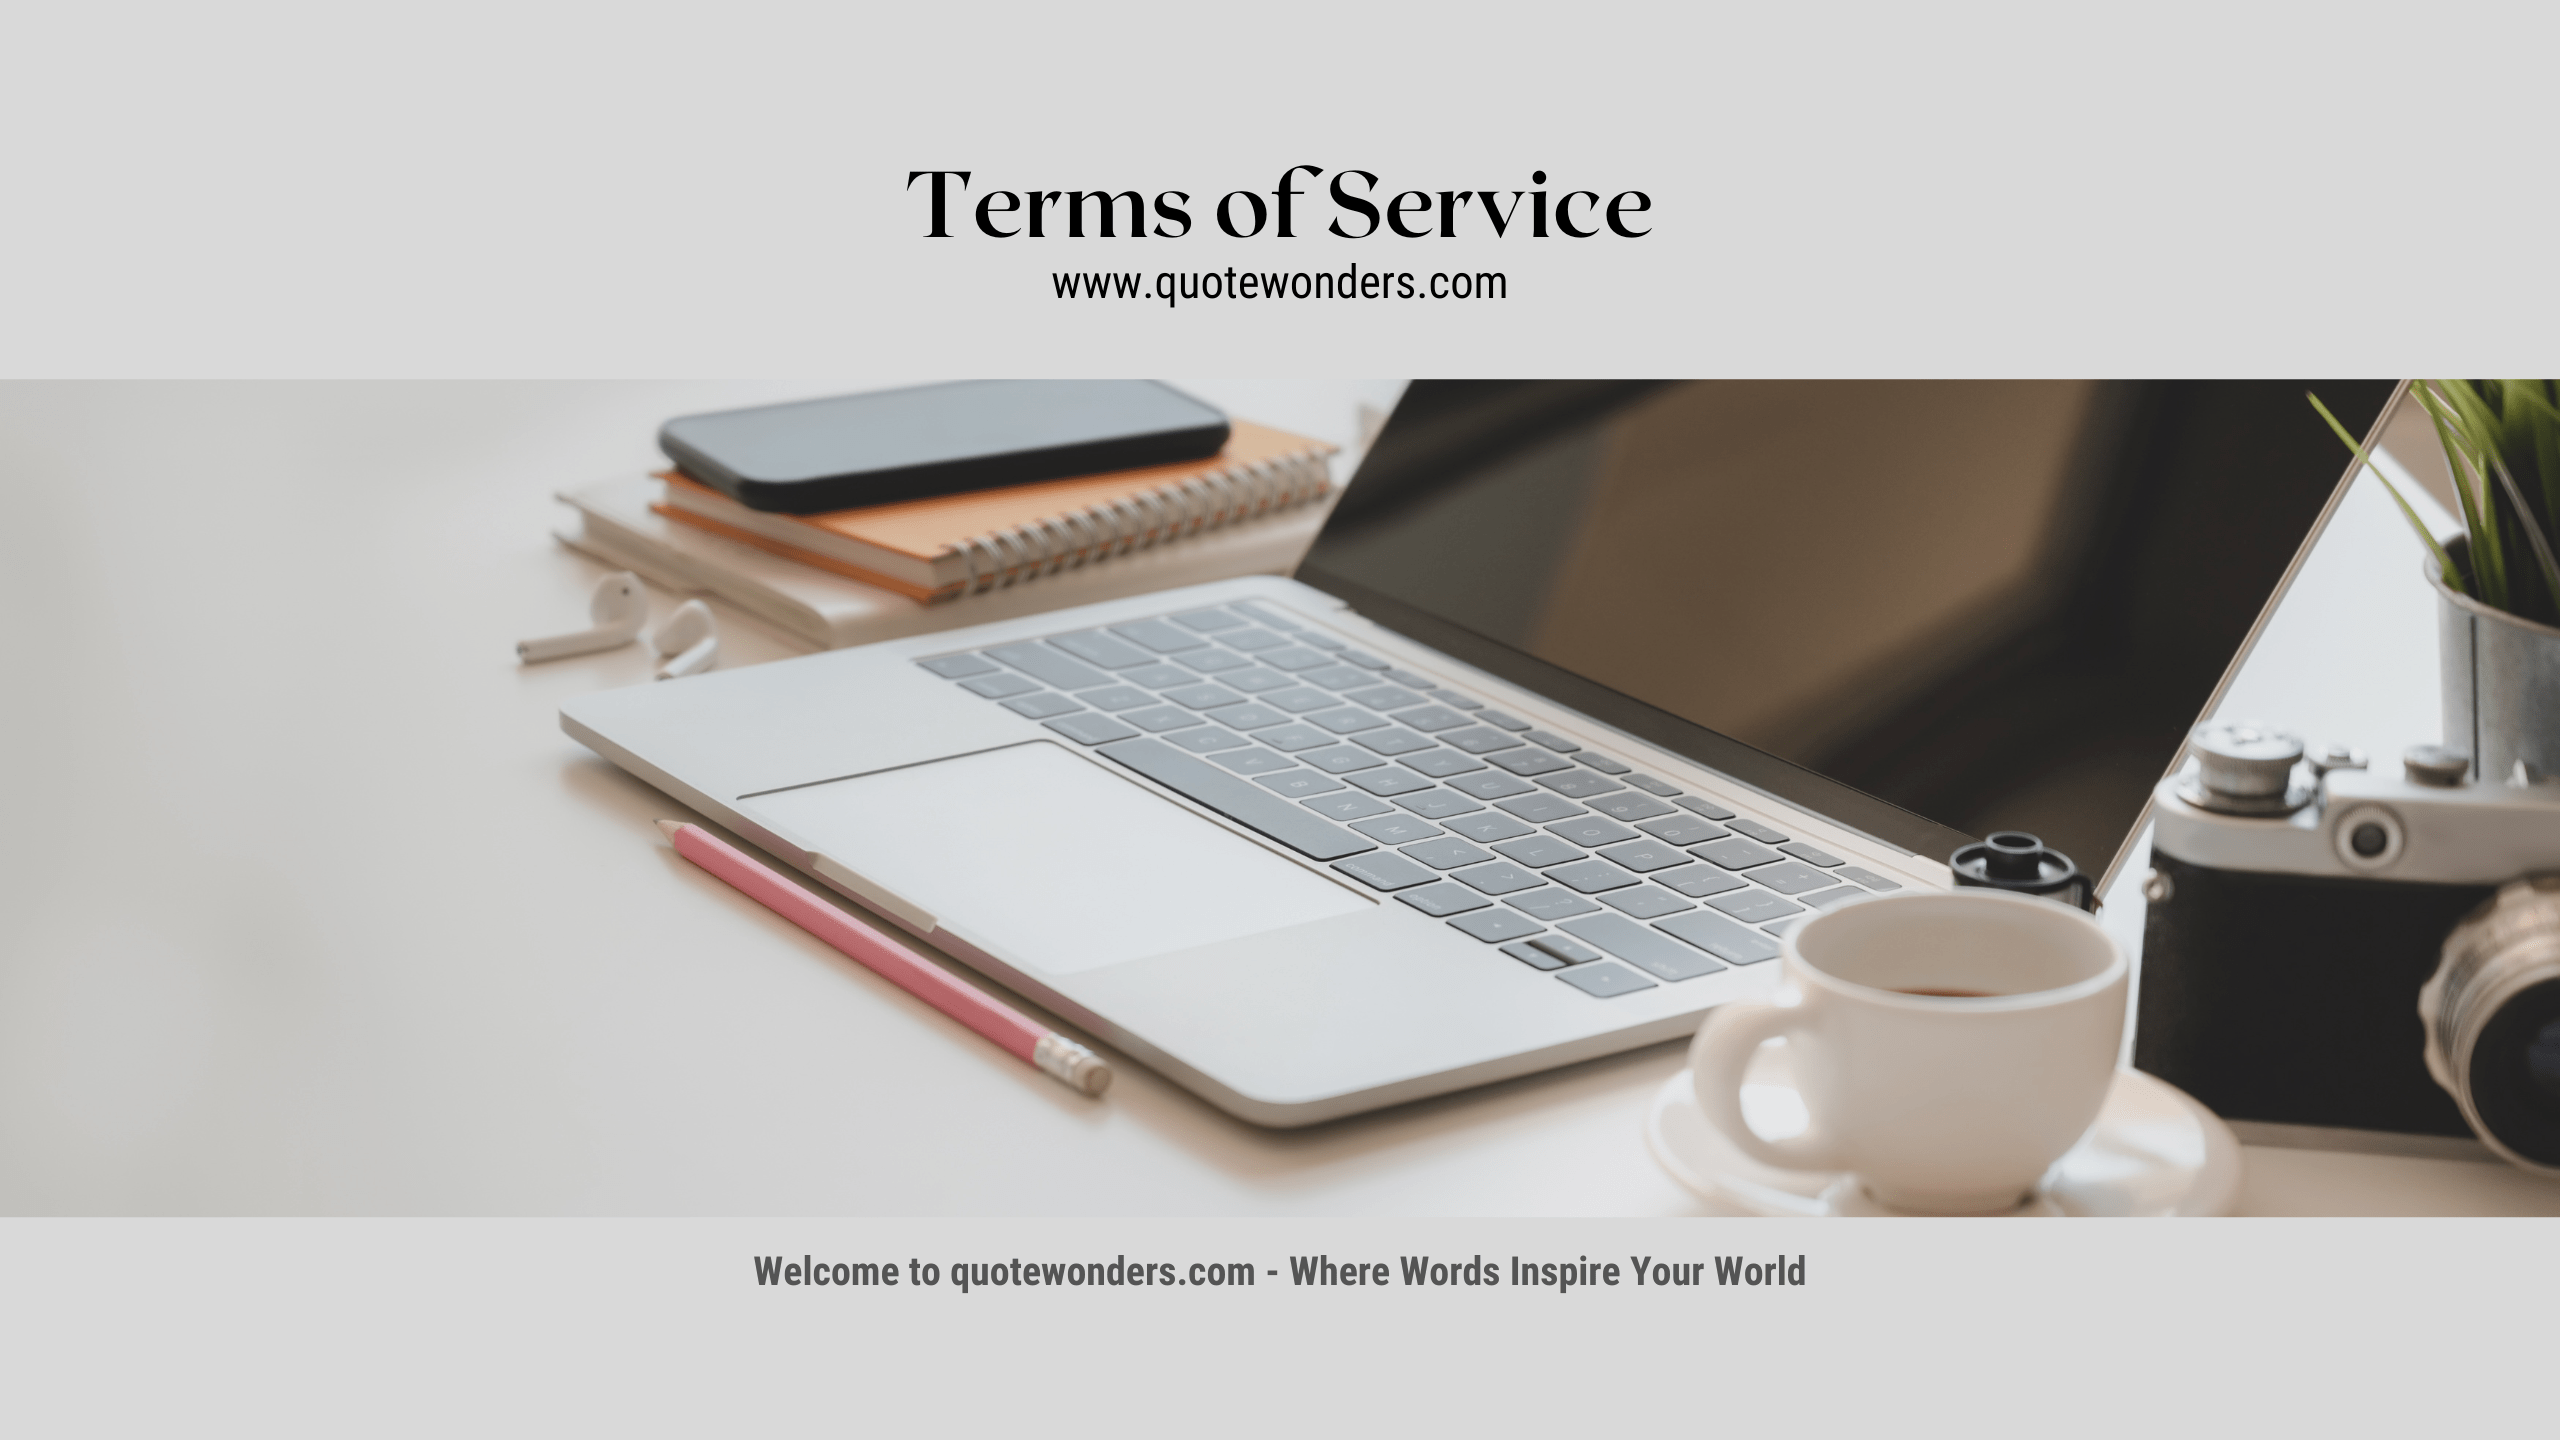 Terms of Service of quotewonders.com